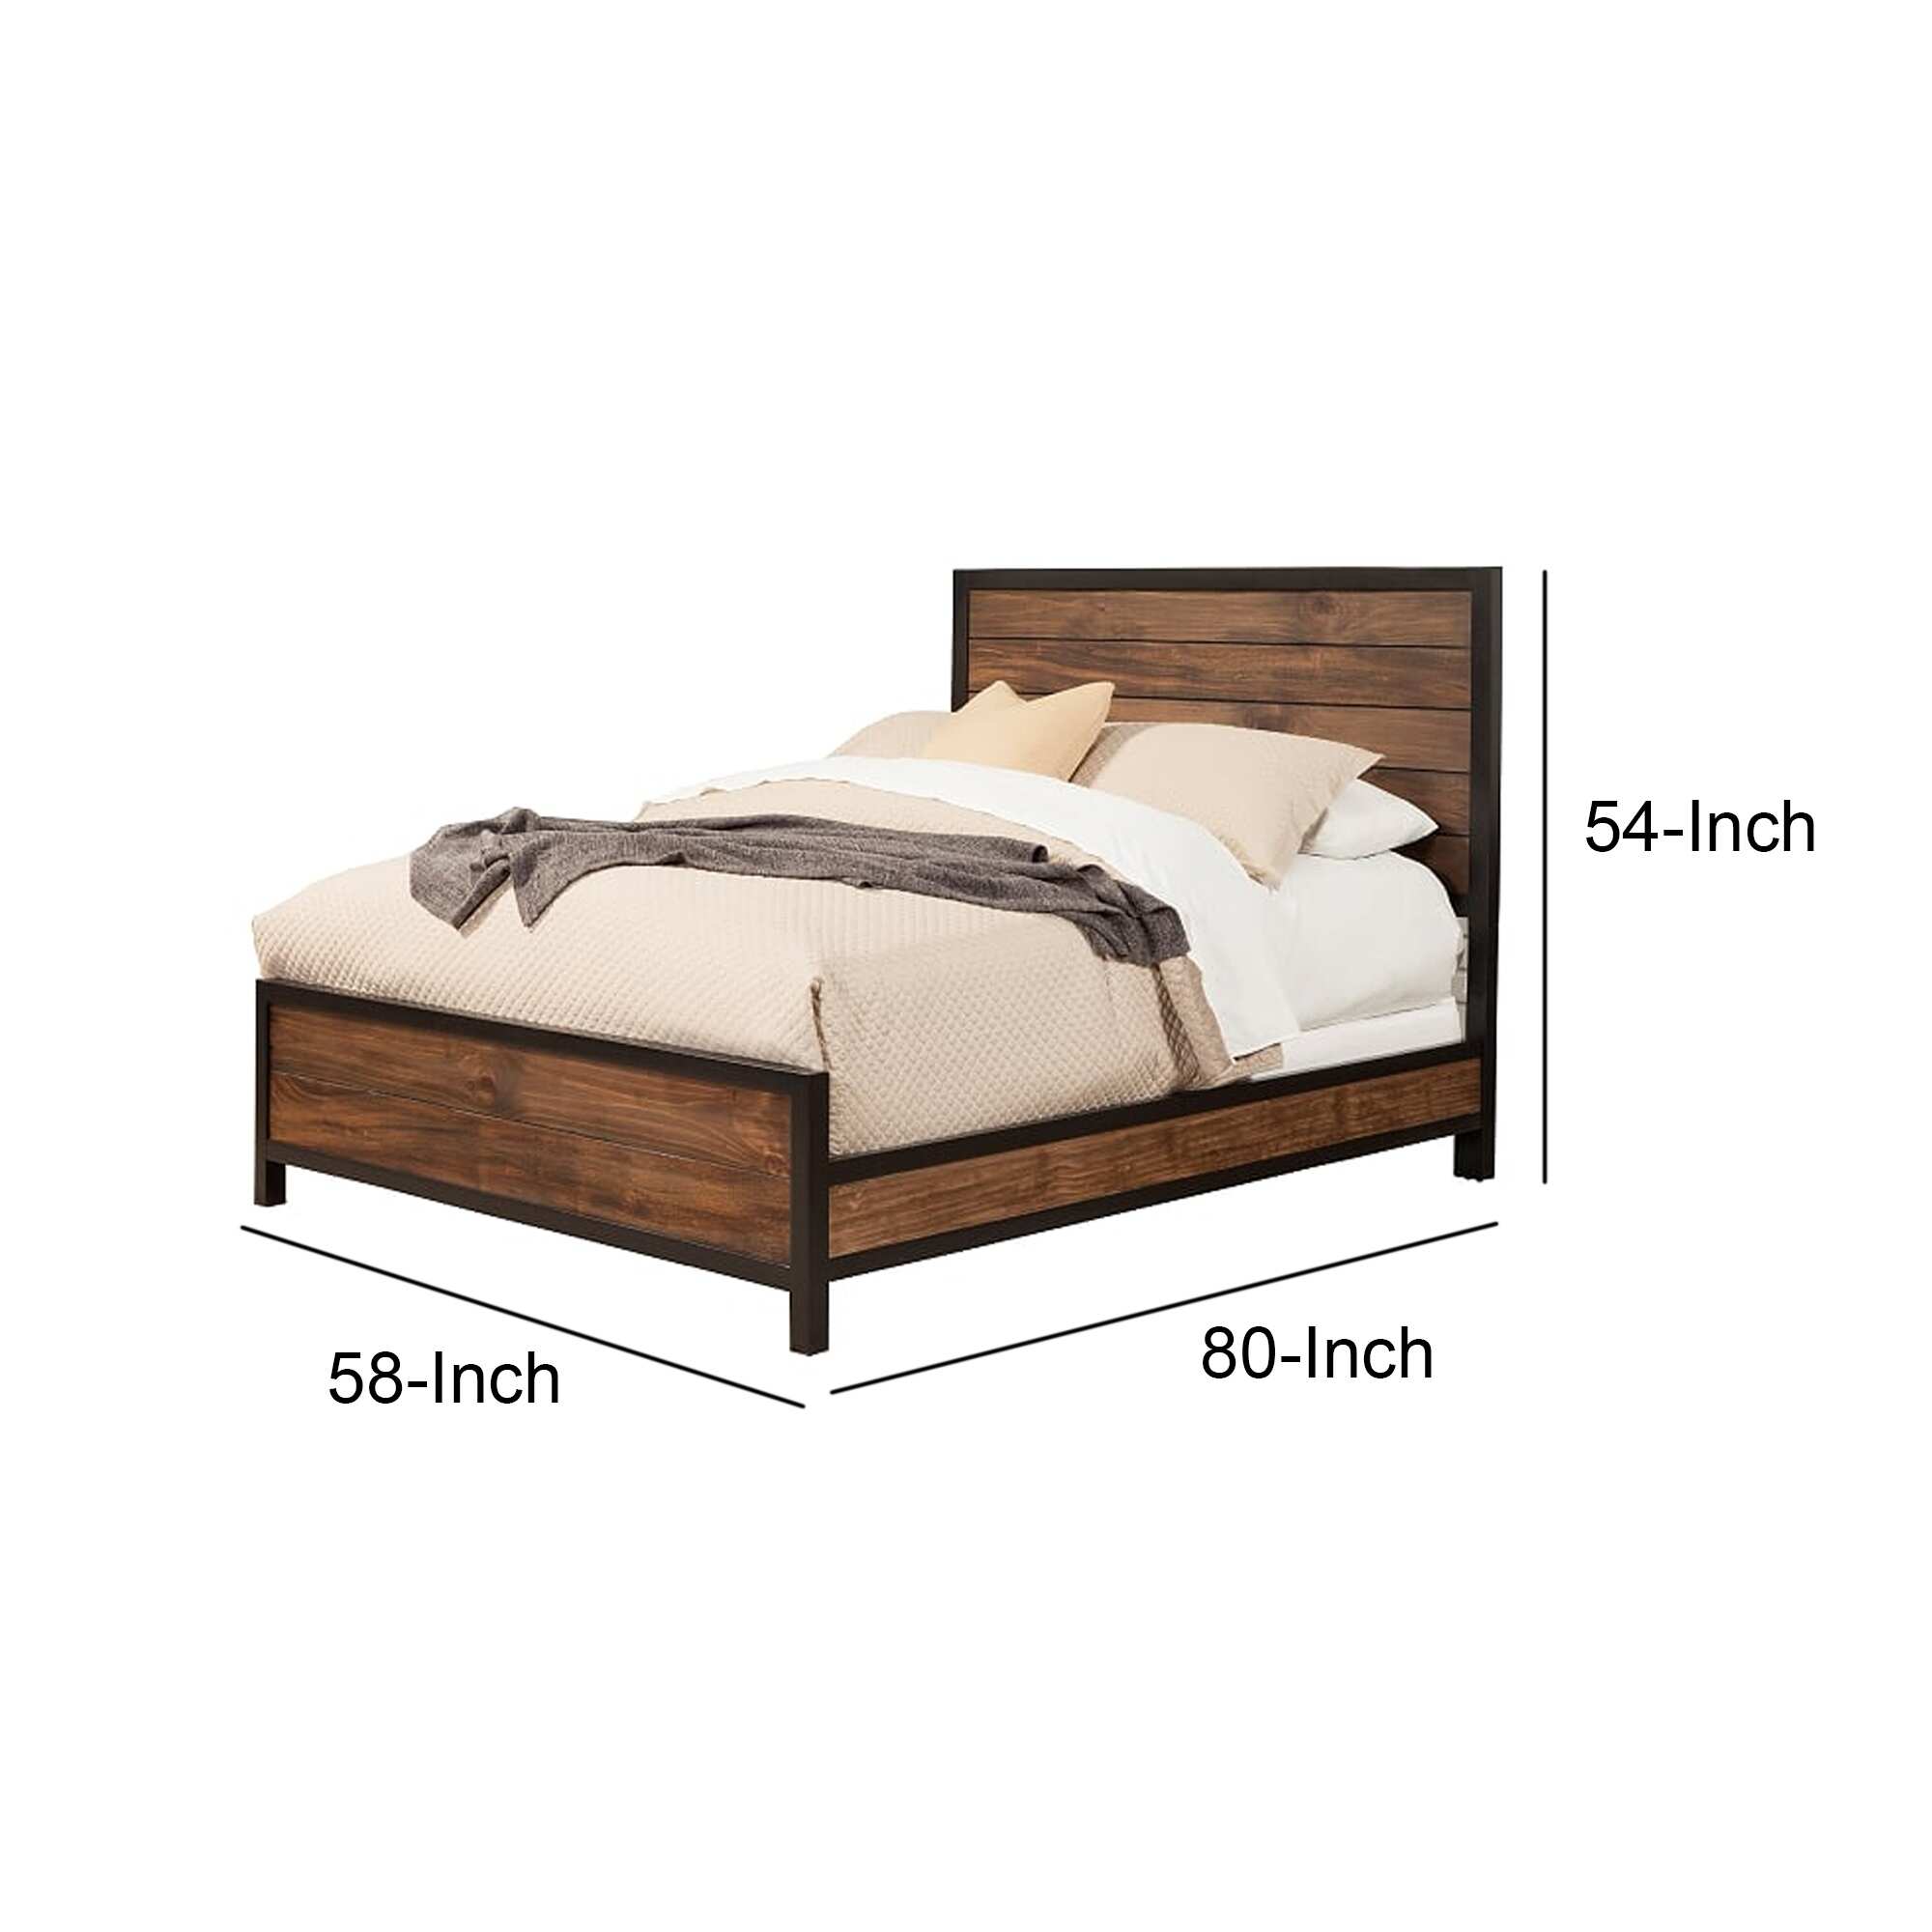 Transitional Two Tone Full Size Bed with Panel Headboard, Brown